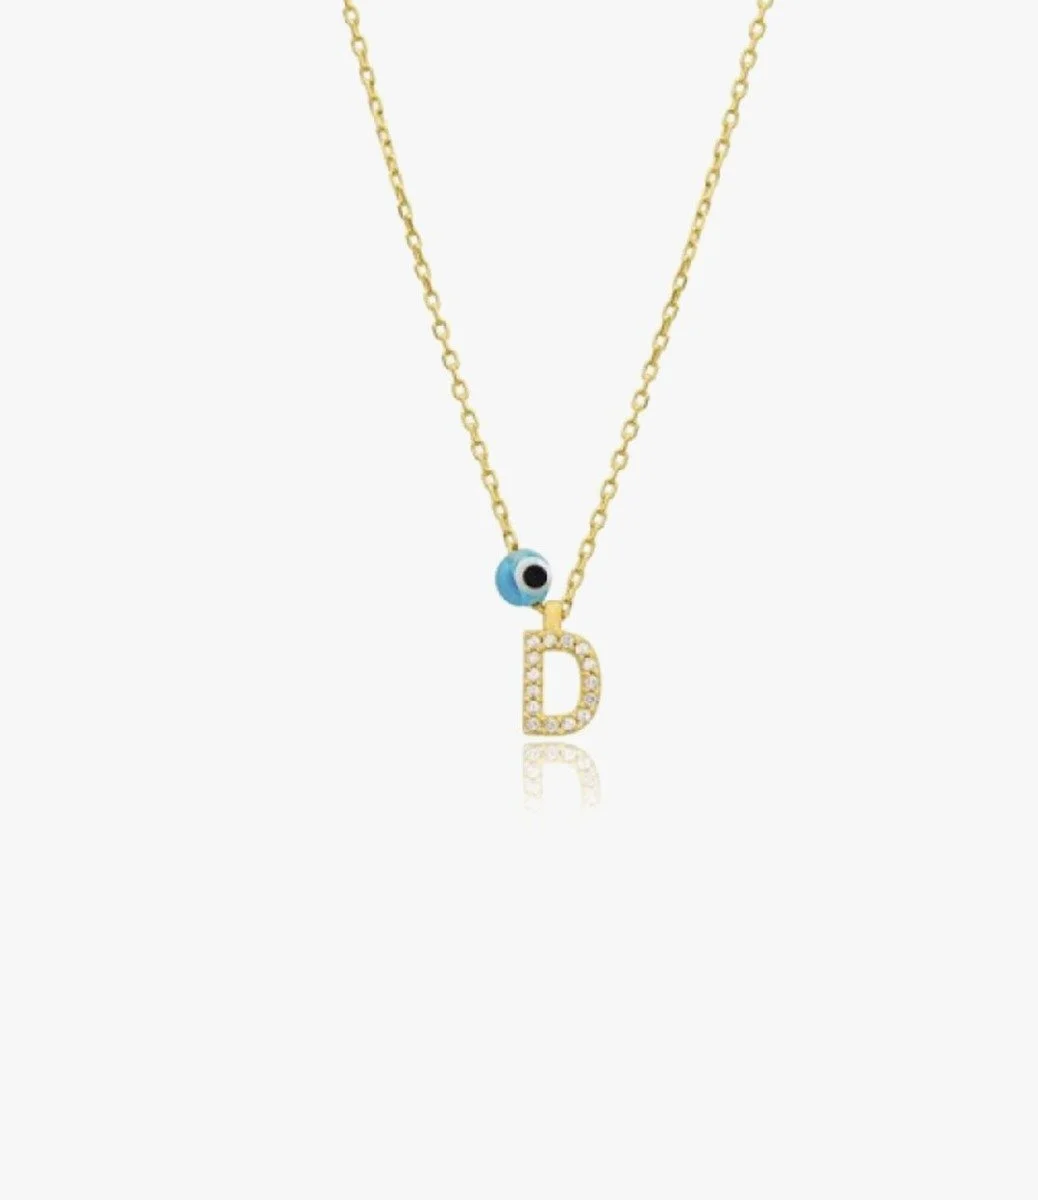 Golden Necklace With Letter D and Blue Bead by NAFEES